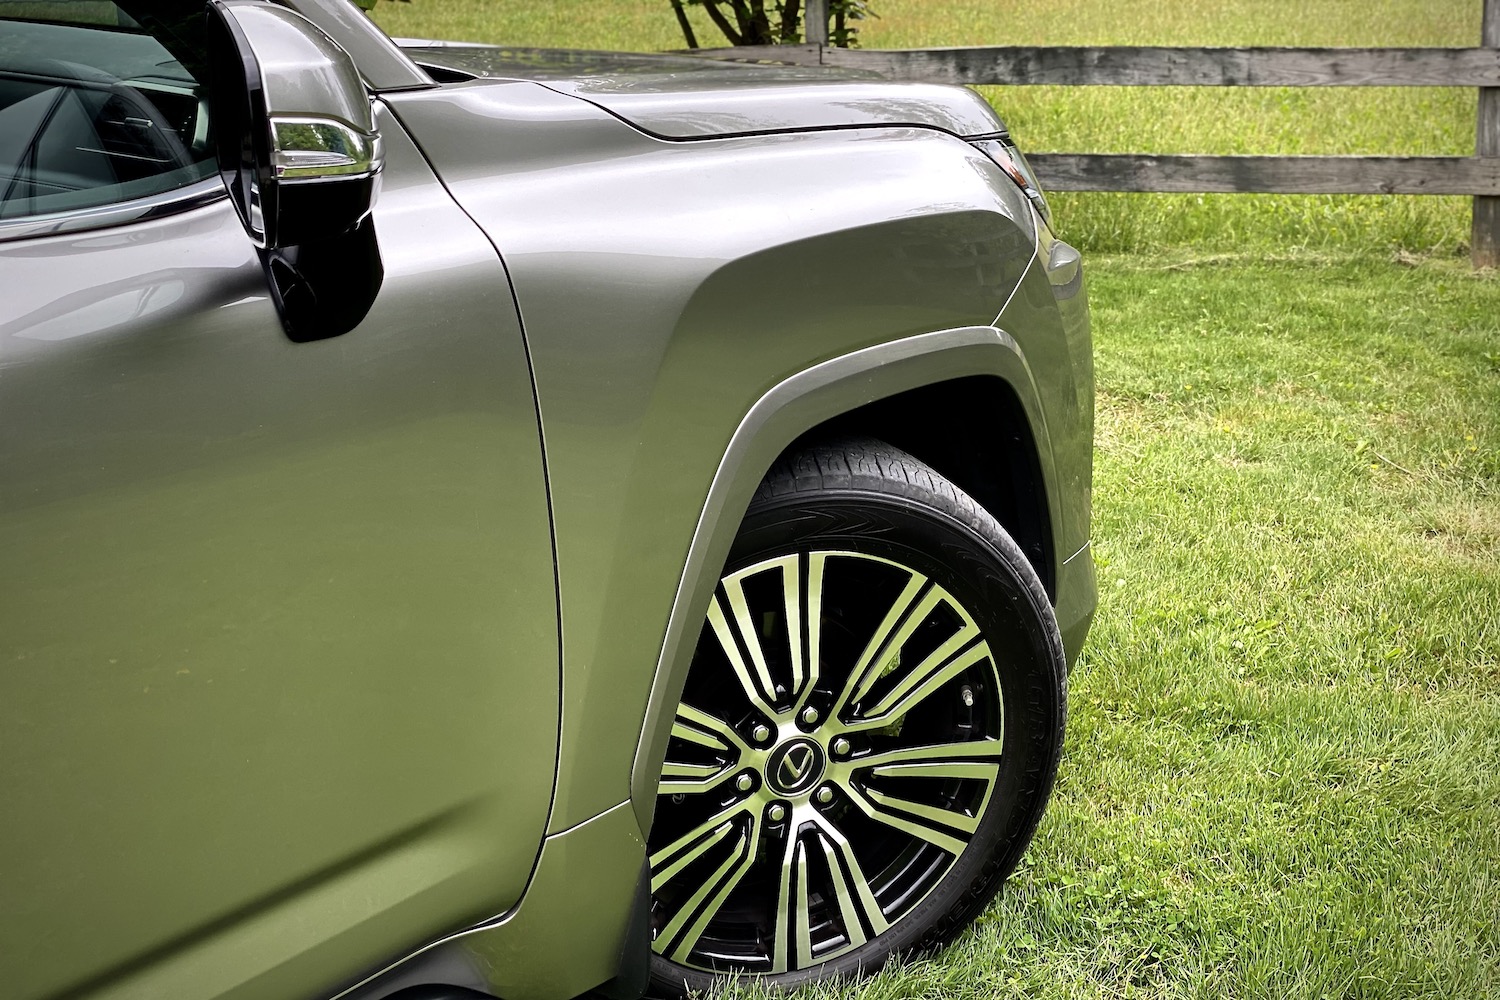 Close up of 2022 Lexus LX 600 front right wheel arch, fender, and wheel on a grassy field.